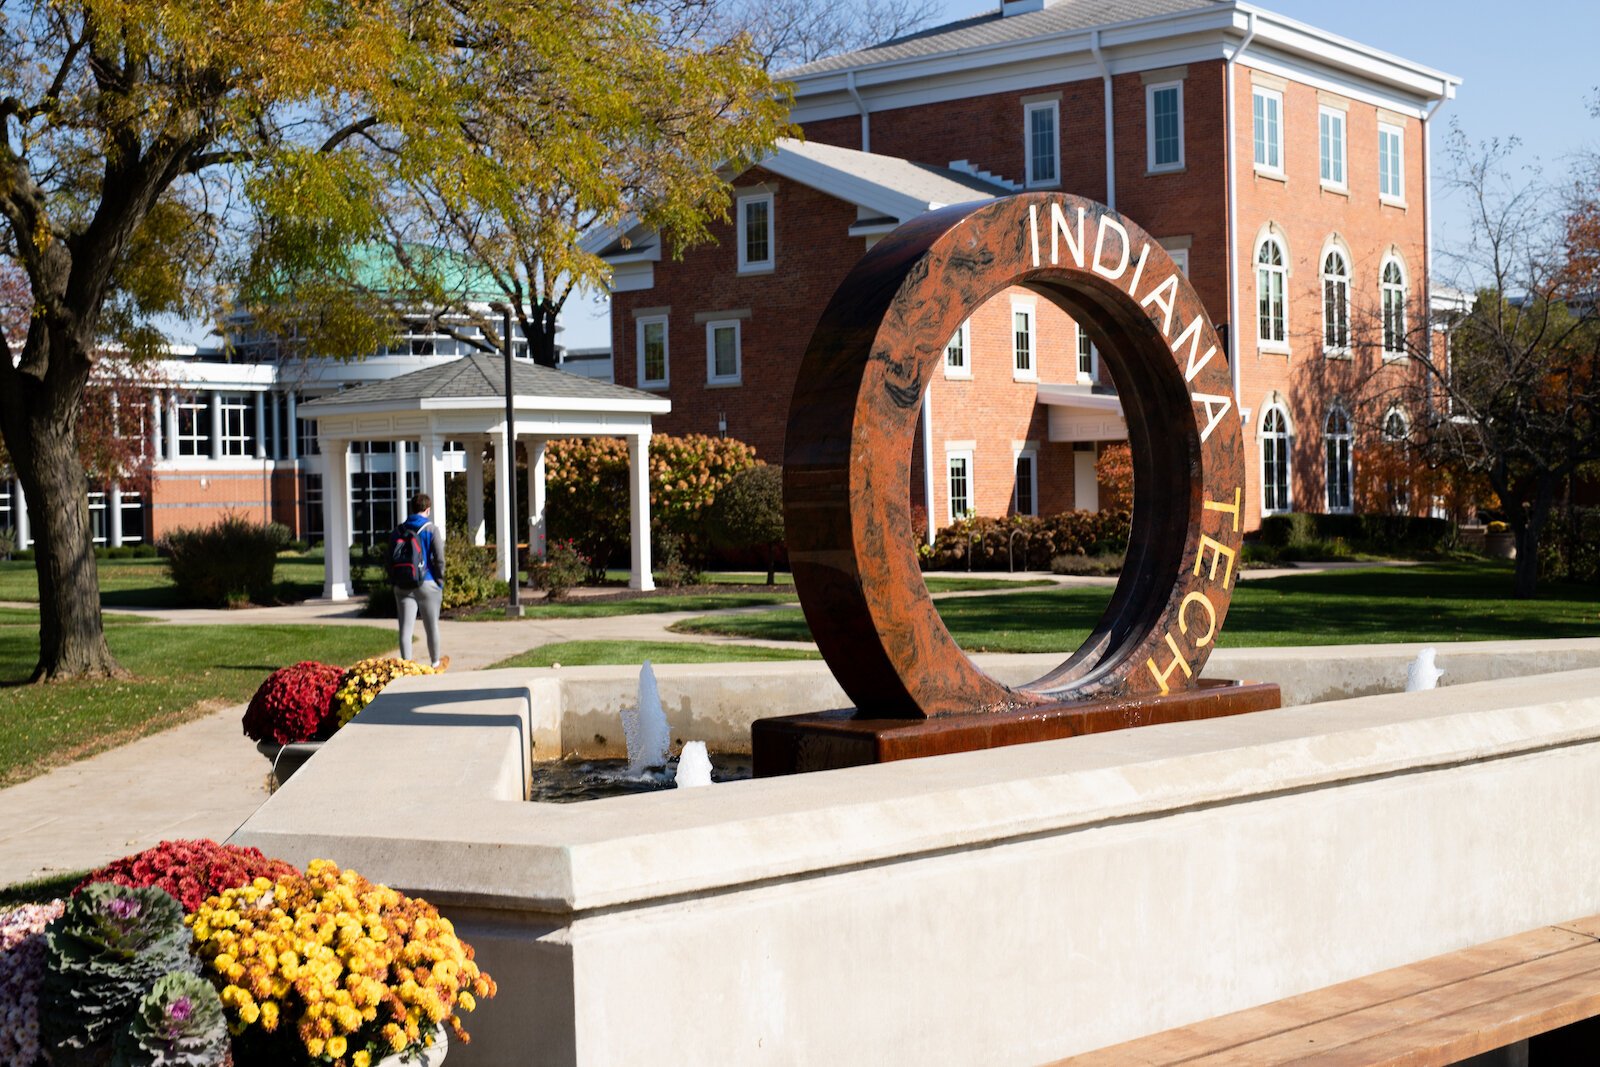 Indiana Tech is growing to support more students in engineering, computer sciences, cybersecurity, life sciences, and technology.